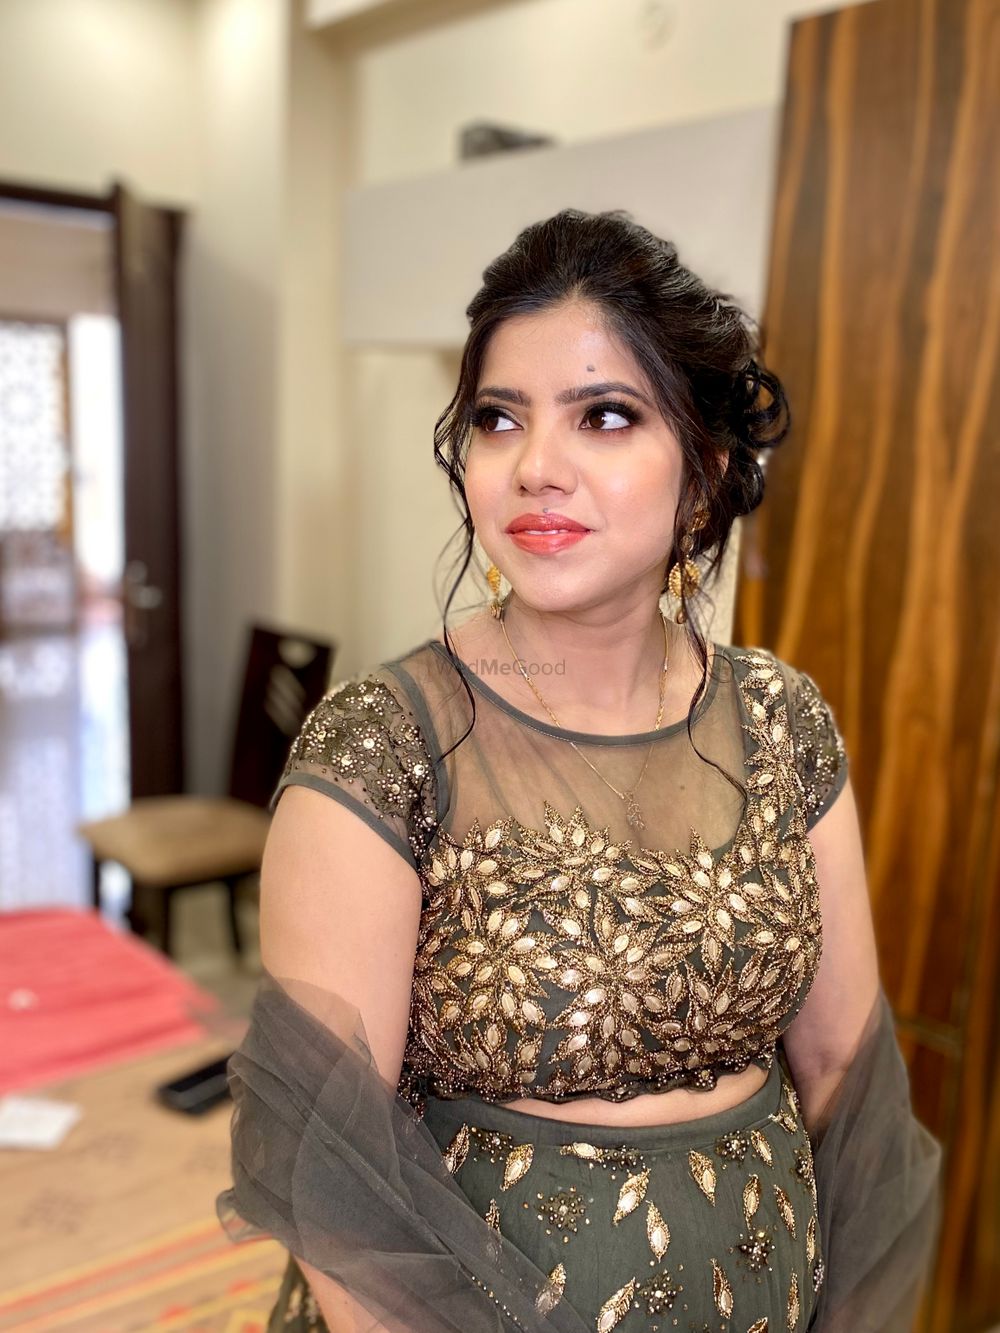 Photo From Party makeup looks  - By Makeup by Chandini Chaudhary 